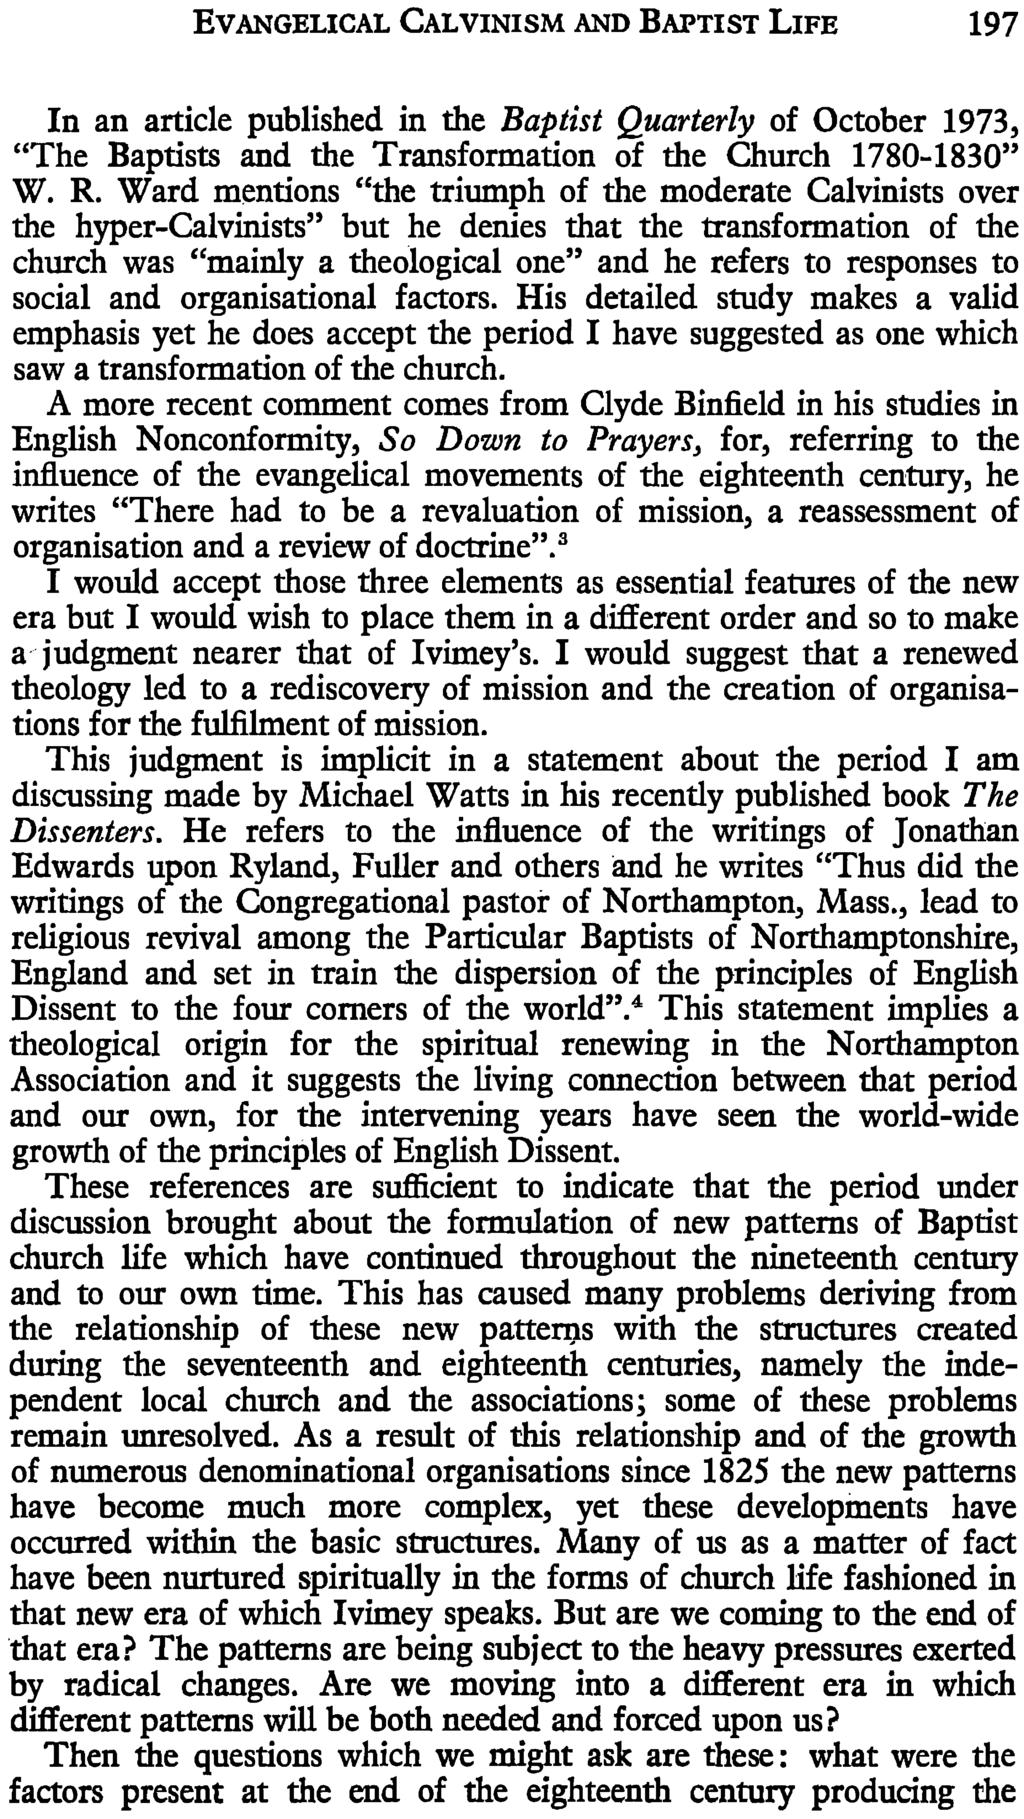 EVANGELICAL CALVINISM AND BAPTIST LIFE 197 In an article published in the Baptist Quarterly of October 1973, "The Baptists and the Transformation of the Church 1780-1830" W. R.